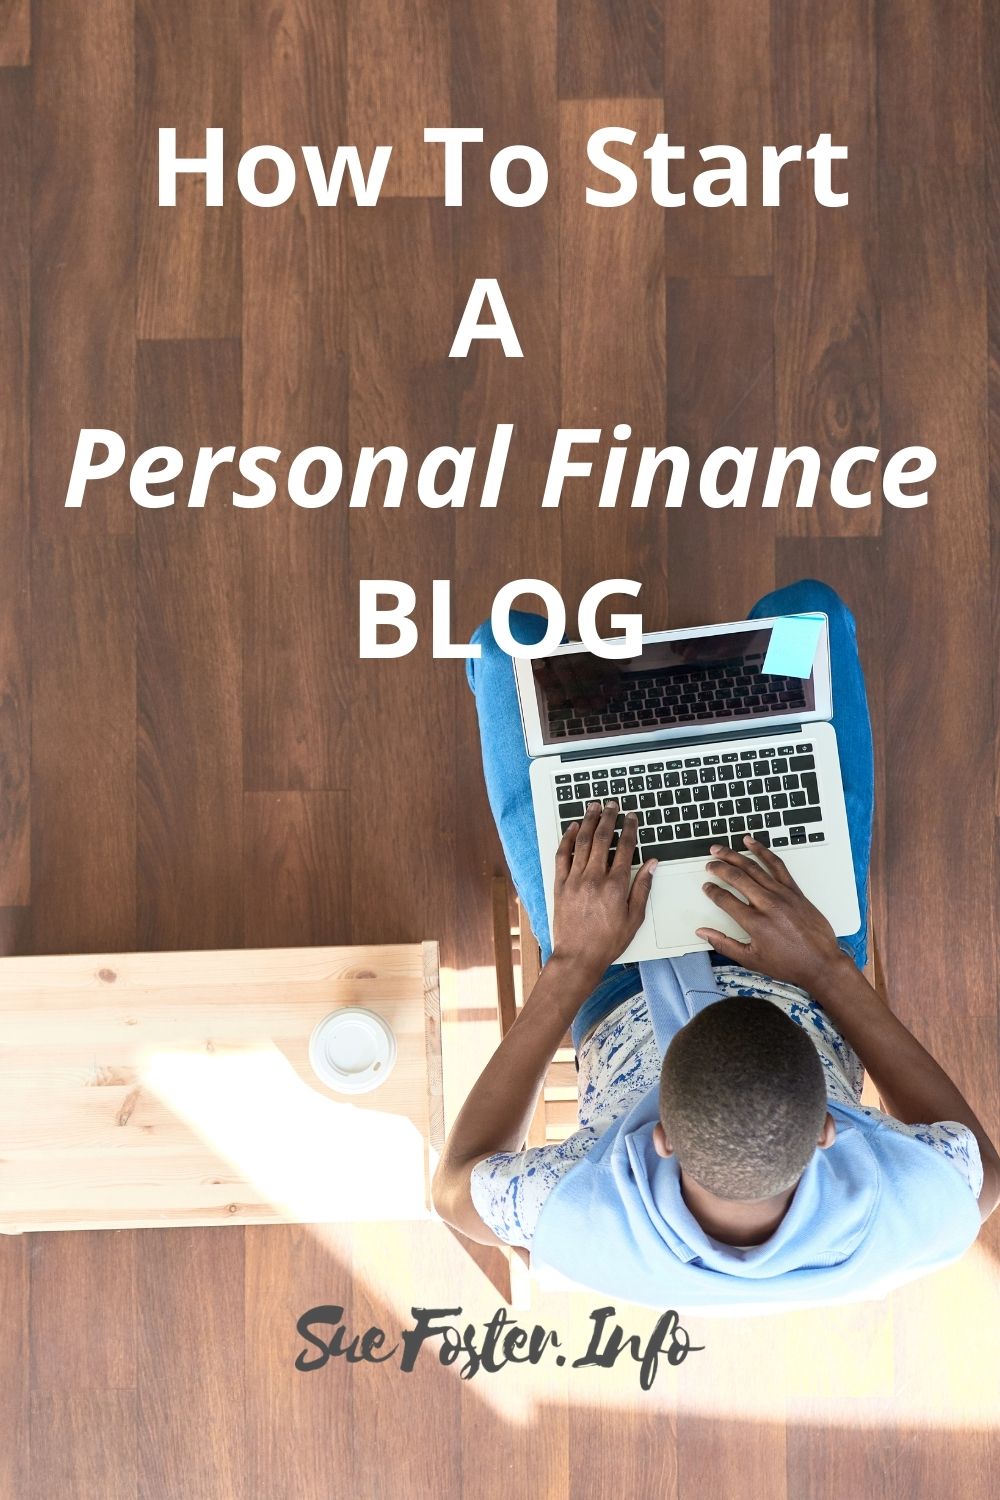 How to start a personal finance blog